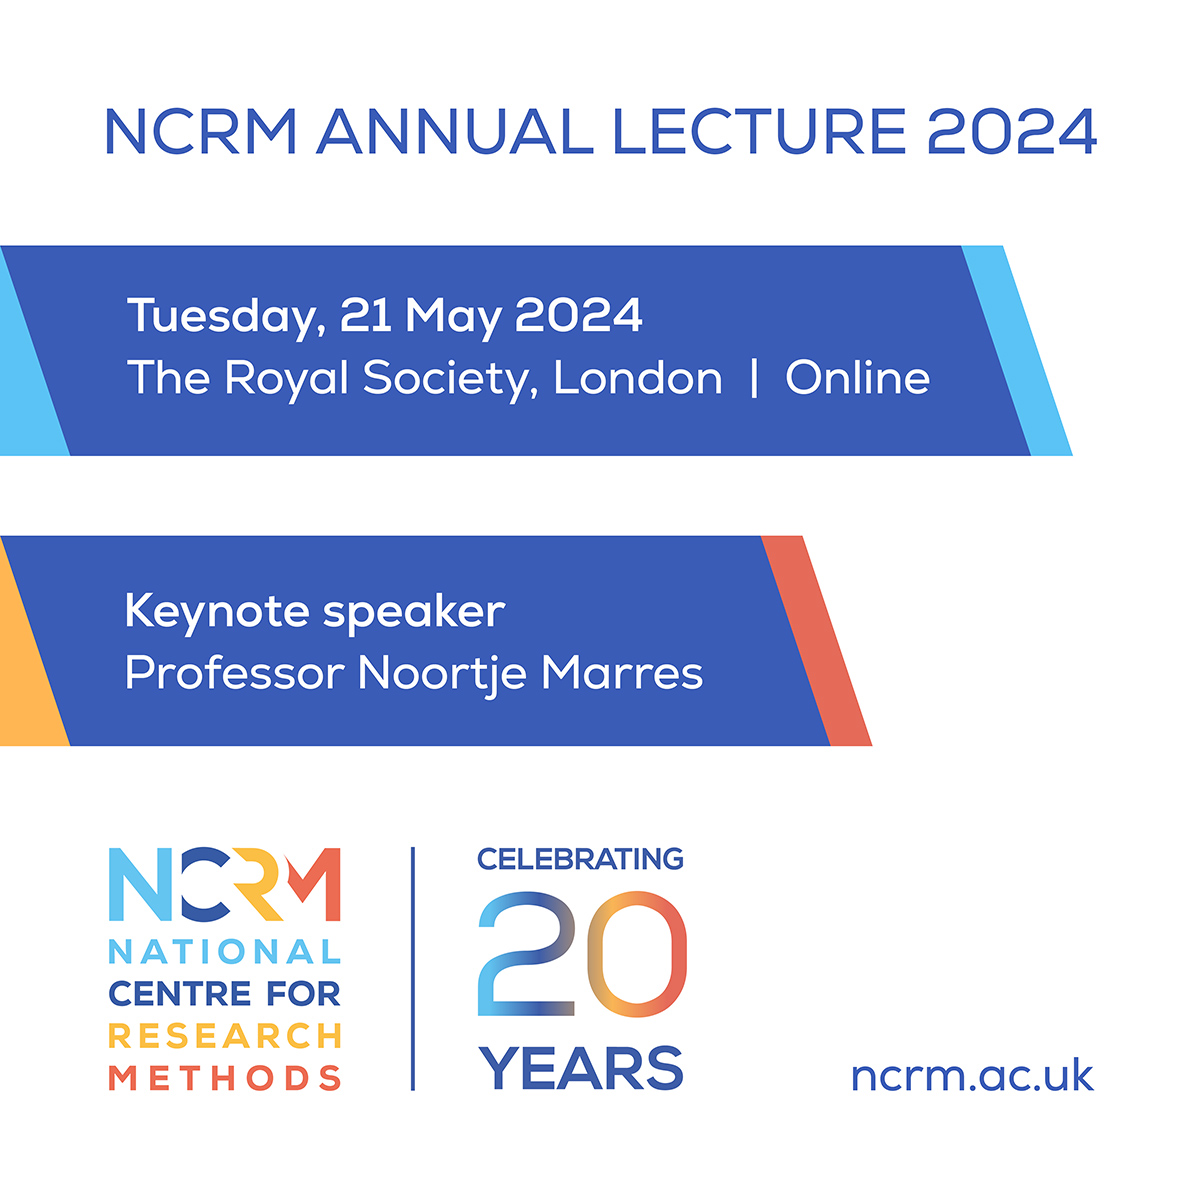 Join us on Tuesday, 21 May for the NCRM Annual Lecture 2024 at the @royalsociety in London. The #NCRM24 speaker is @NoortjeMarres of @CIMethods, who will discuss the new challenges that AI poses to the sciences of society. Learn more: ncrm.ac.uk/training/lectu…